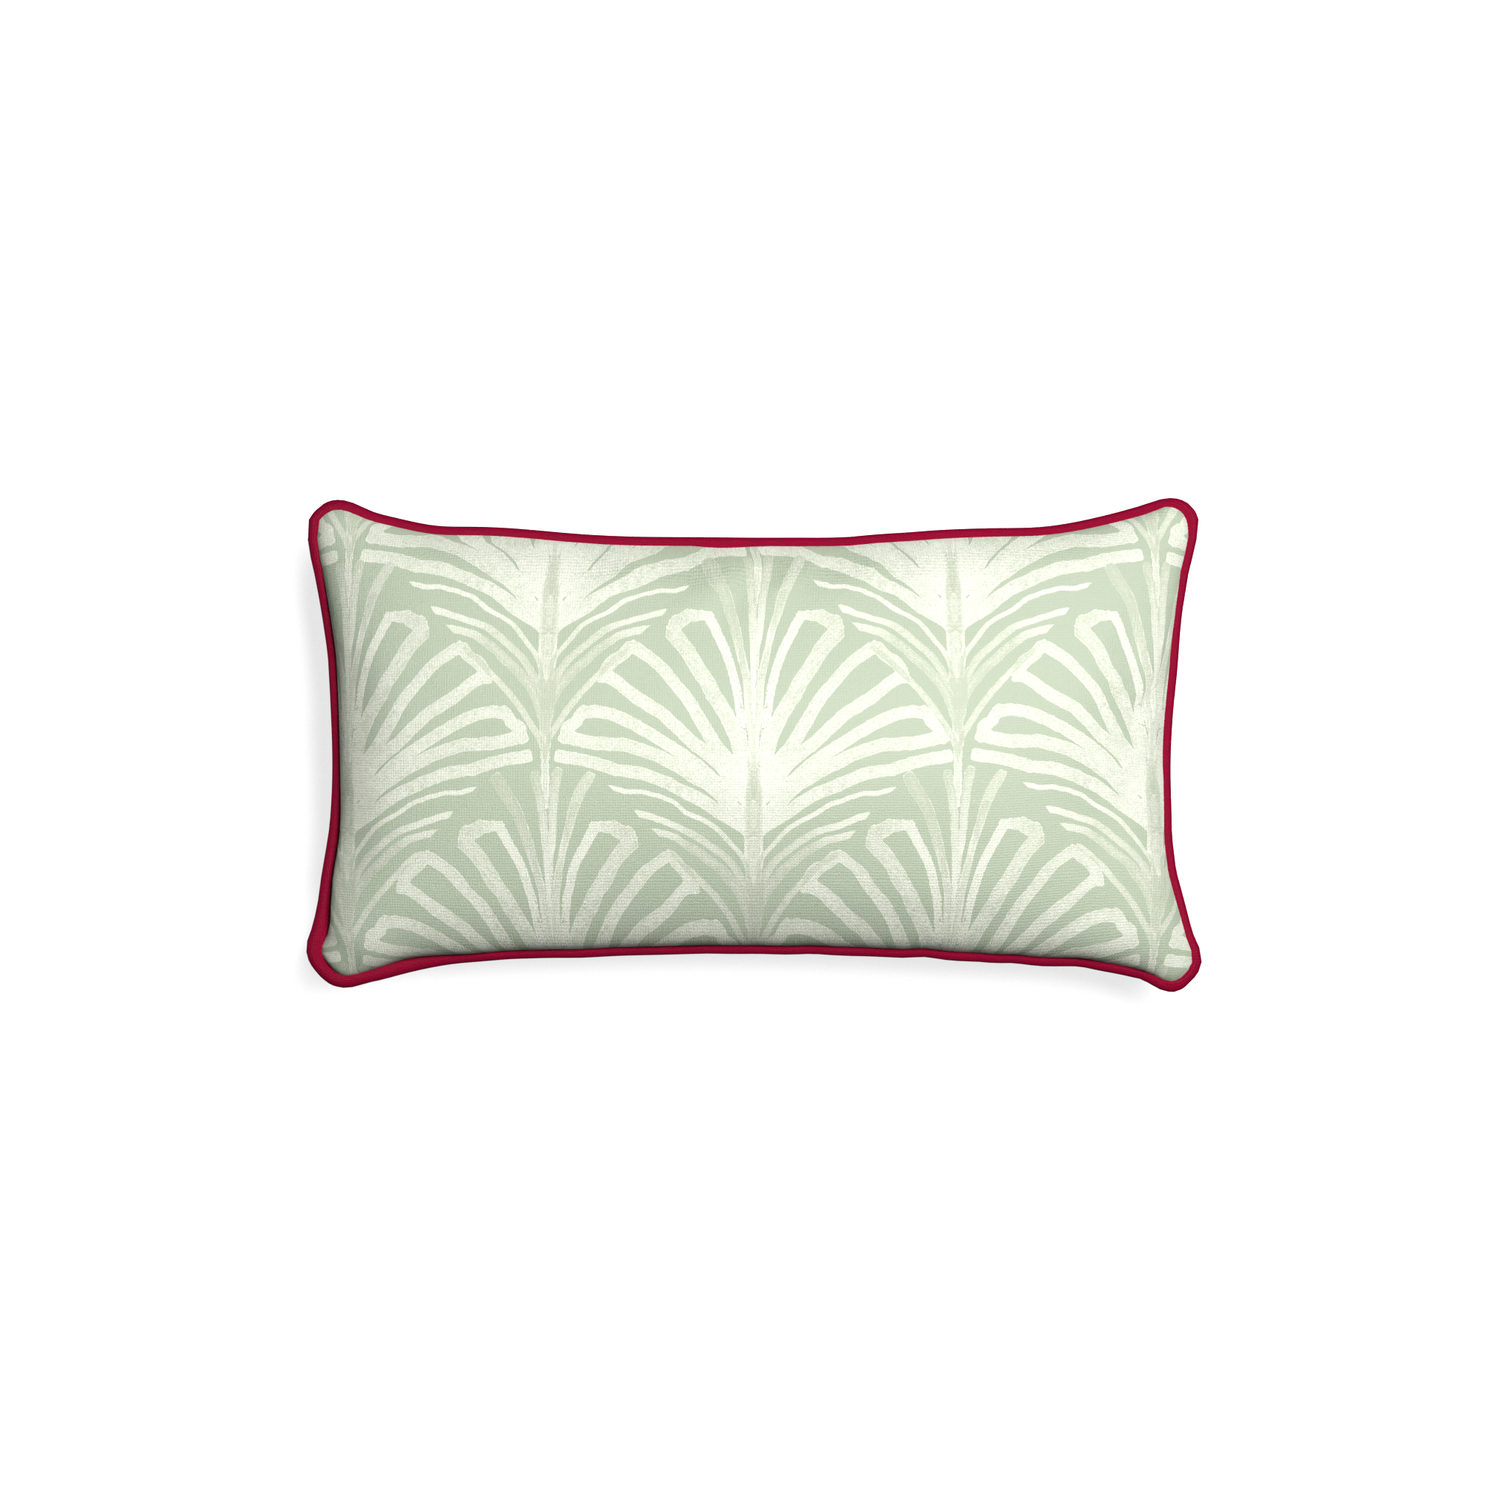 Petite-lumbar suzy sage custom sage green palmpillow with raspberry piping on white background